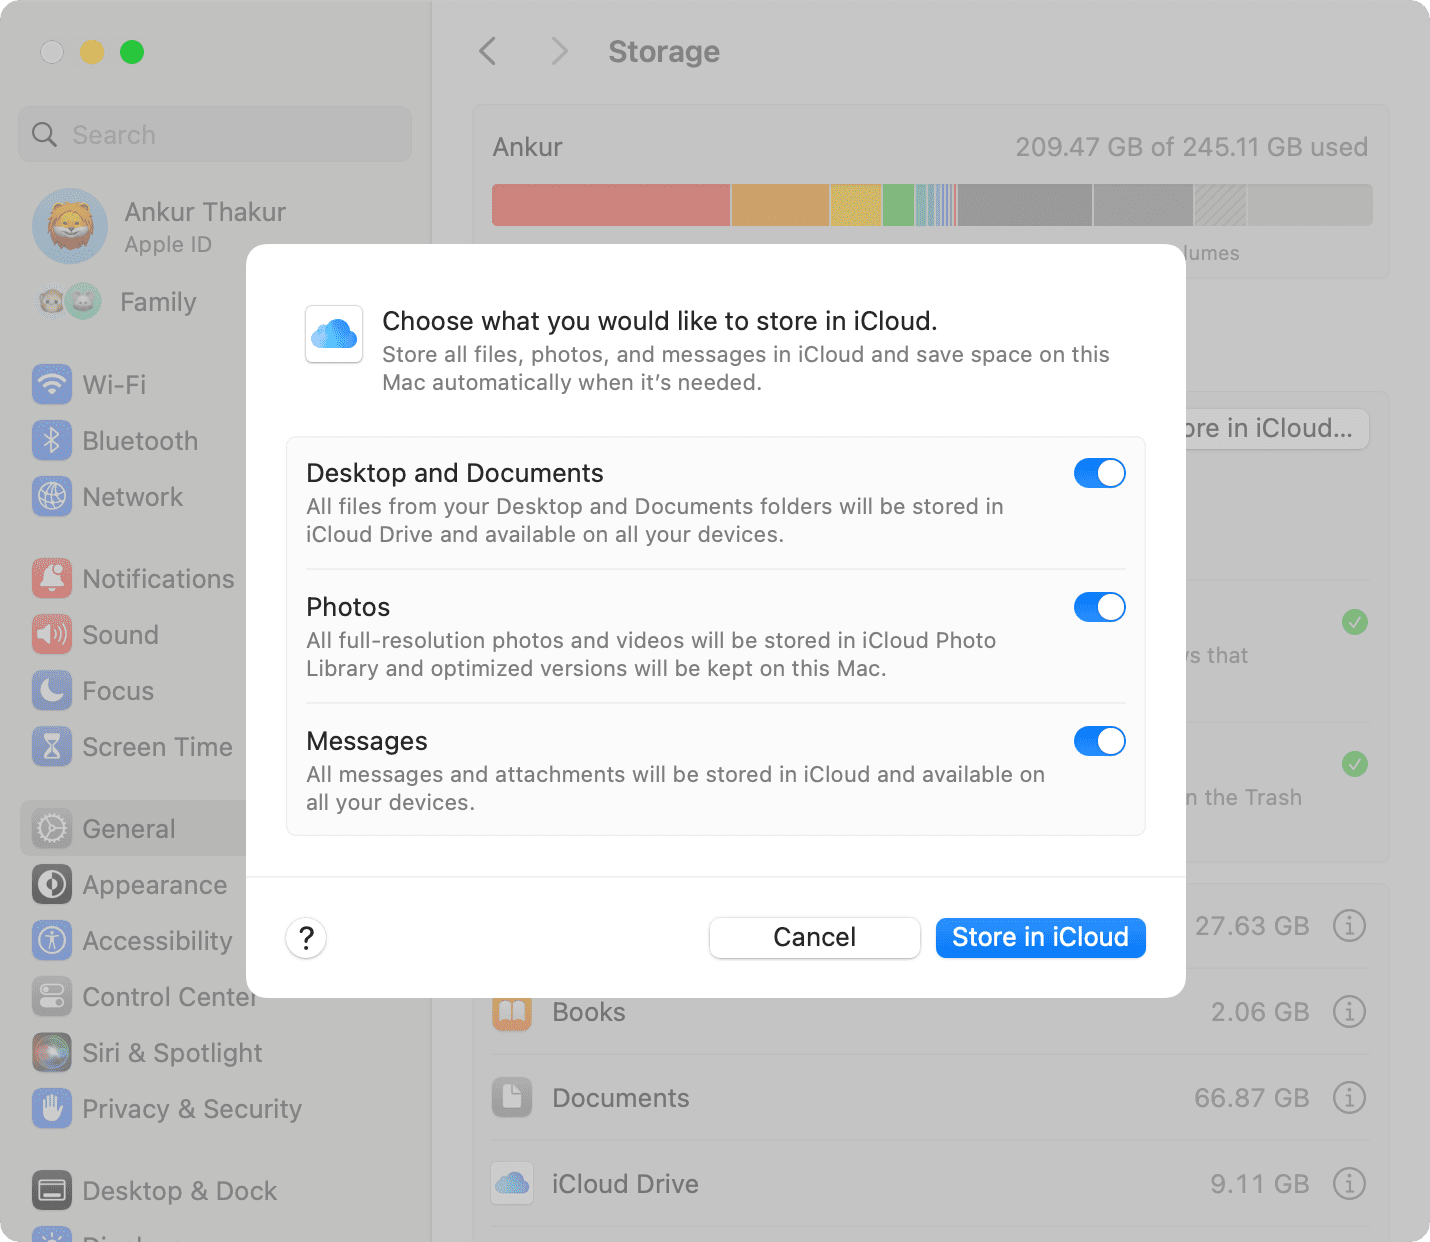 Choose what you would like to store in iCloud on Mac